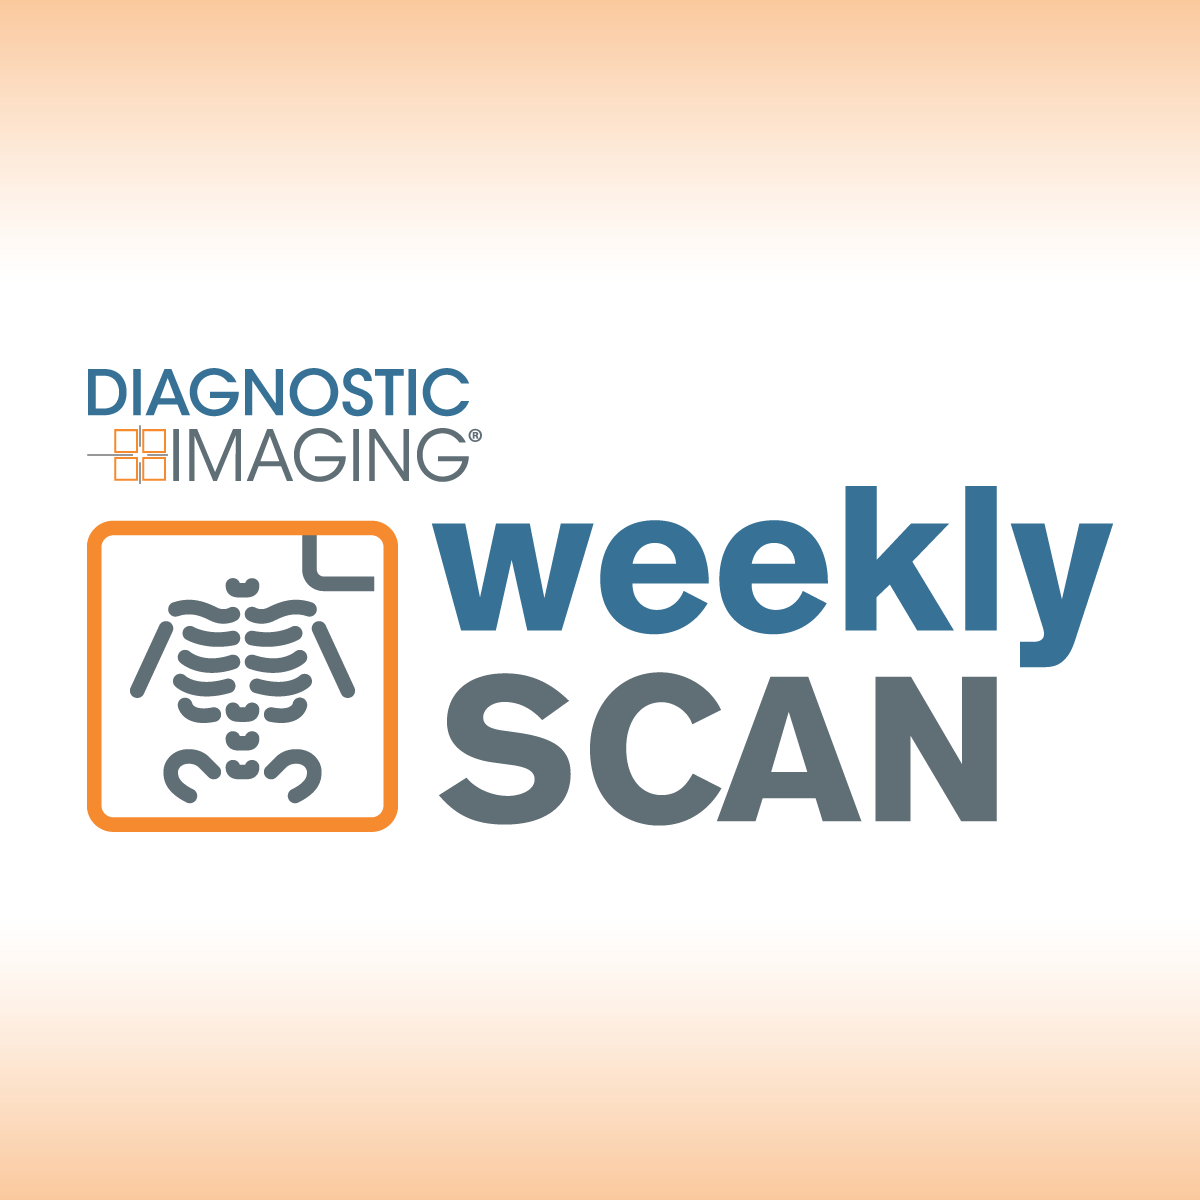 Diagnostic Imaging's Weekly Scan: August 6-August 12